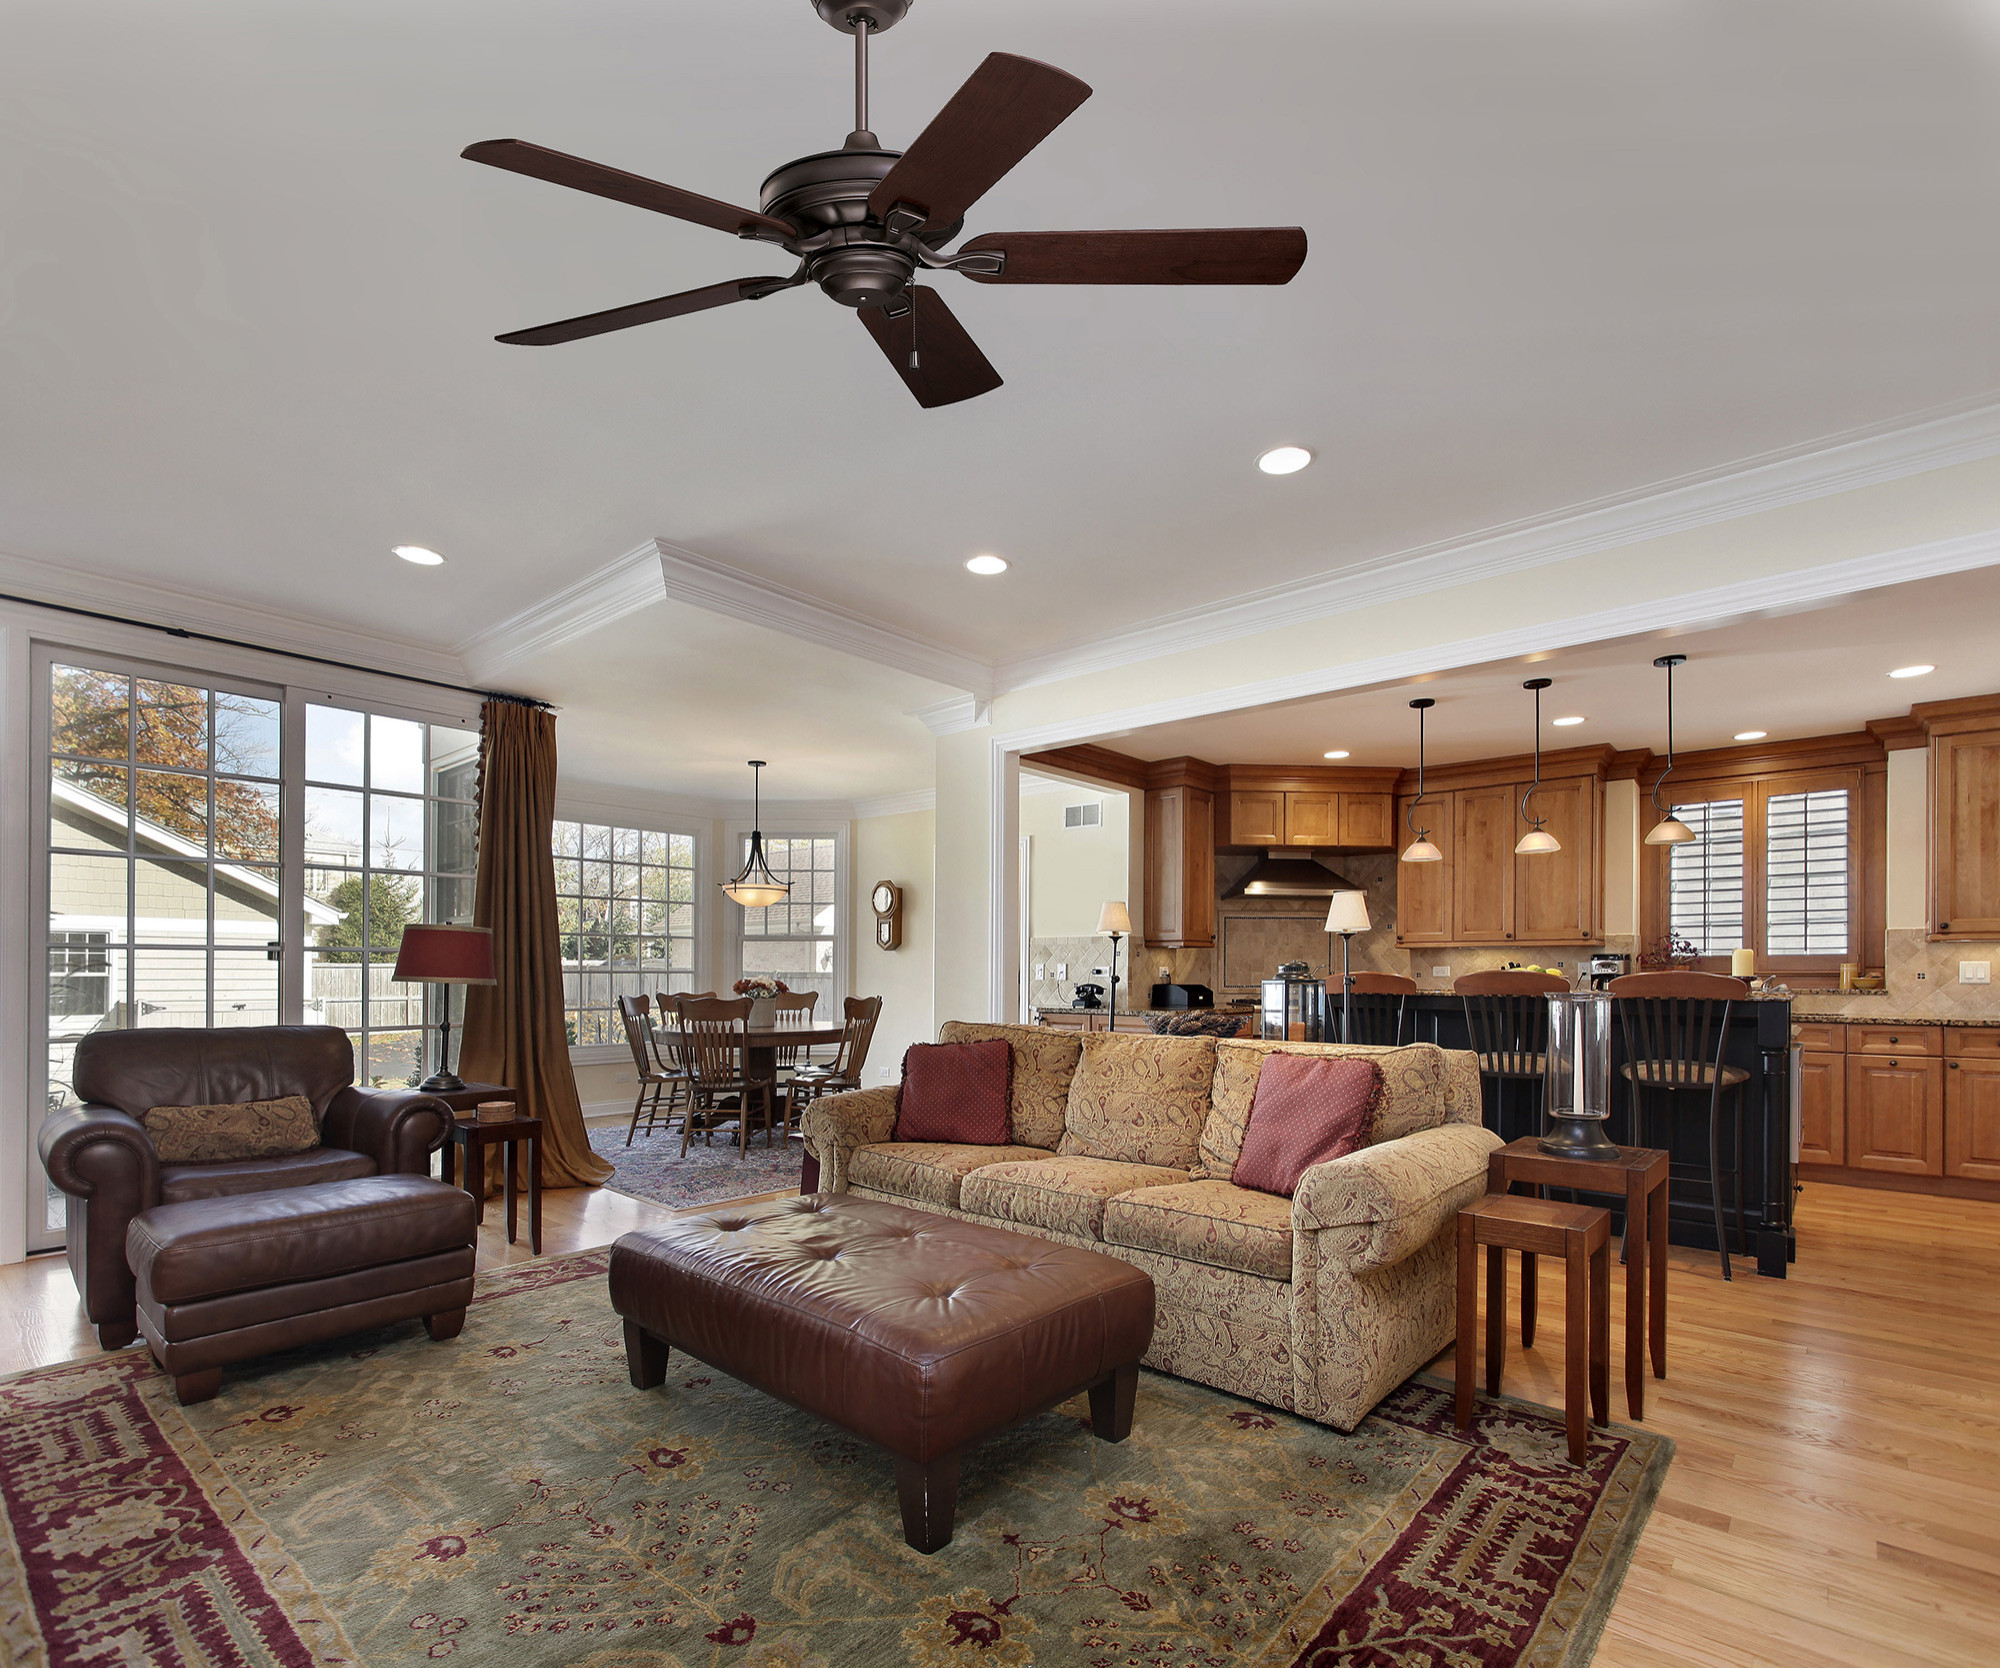 Emerson Fans CF452ORB Carrera Bella Oil Rubbed Bronze Ceiling Fan -  Traditional - Living Room - Chicago - by Lighting Reimagined | Houzz